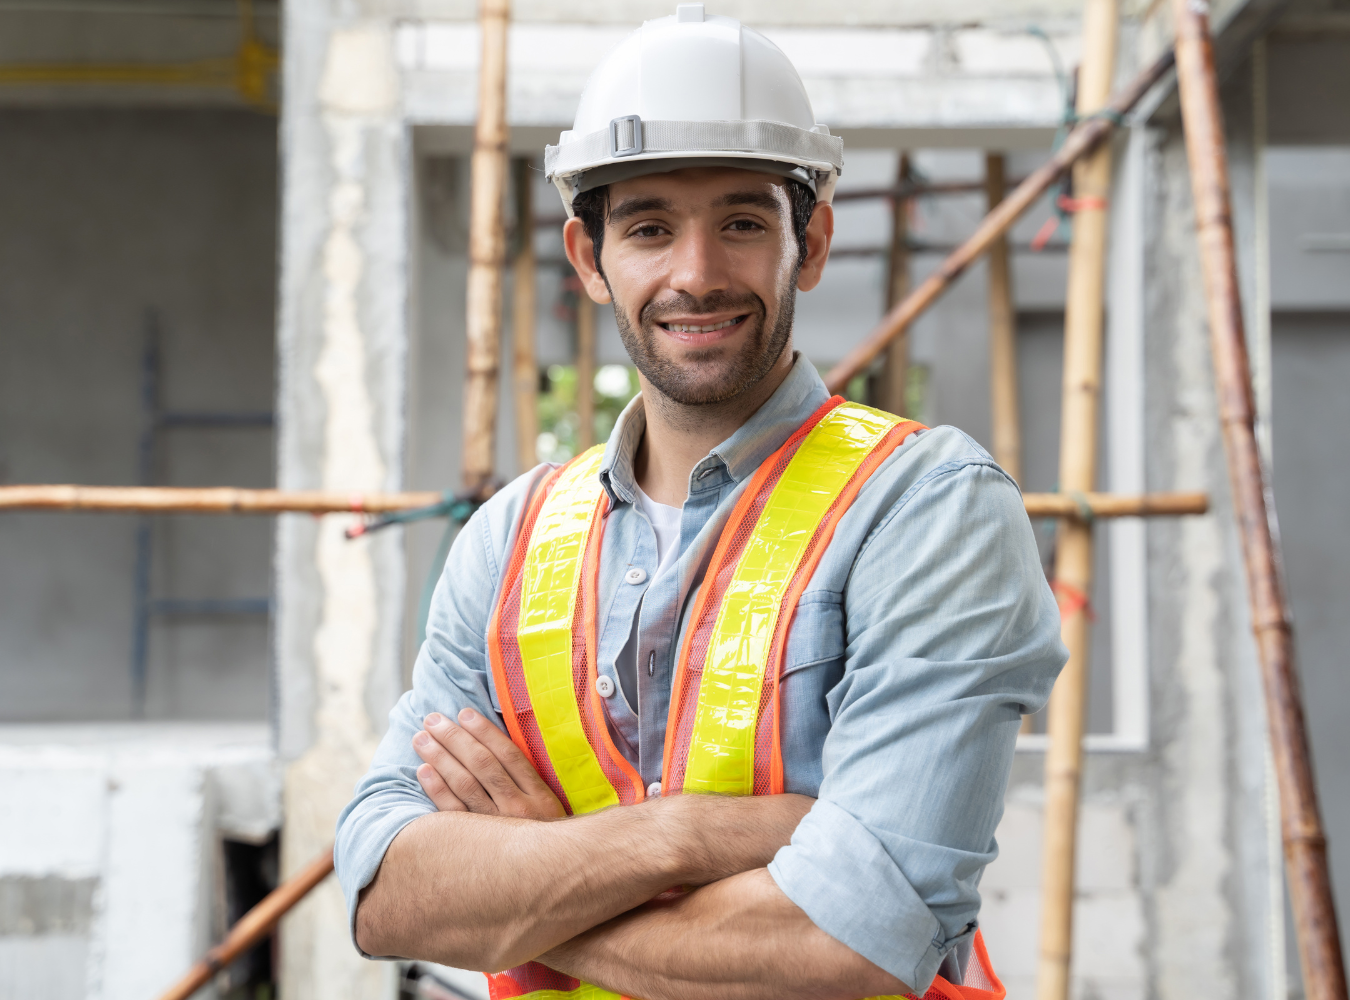 Work Safely in the Construction Industry